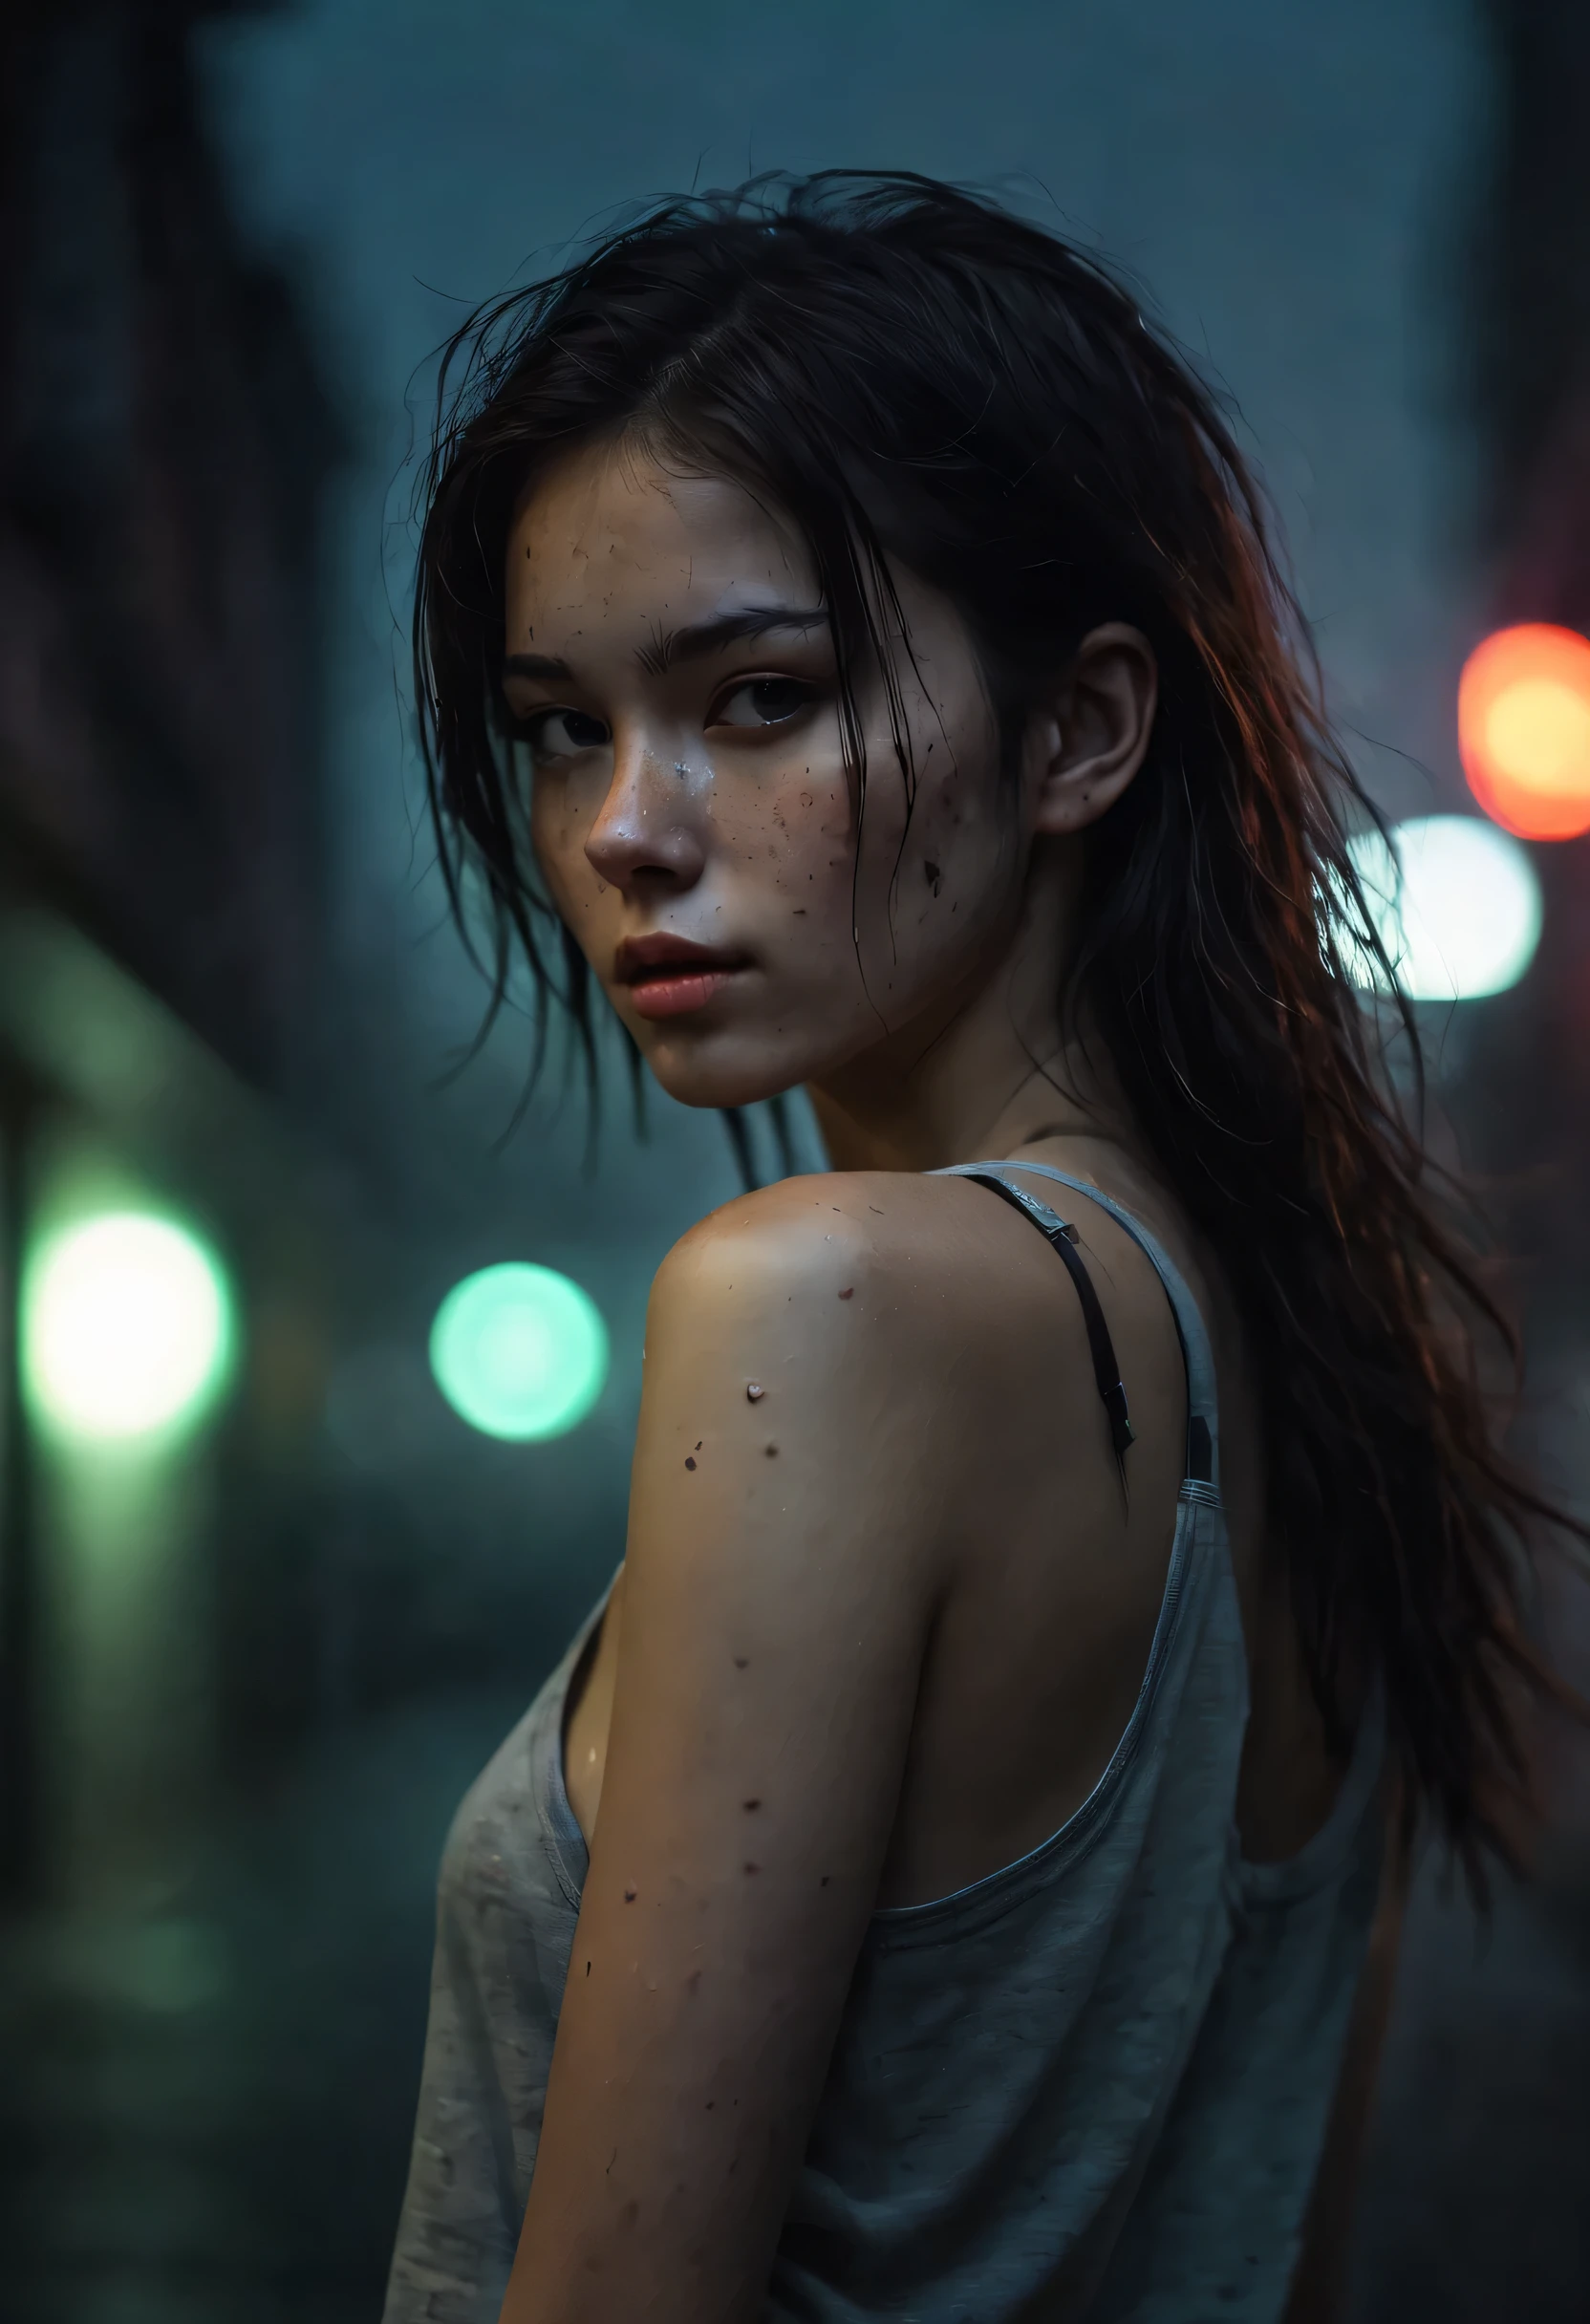 city street, neon, fog, volumetric, closeup portrait photo of young woman in dark clotheessy hair:0.3), (naked breast), (shot from distance), (dirty body:1.6), Indifferent, (body sweat), (wet body), tank top, depth of field, (gorgeous:1.2), detailed face, dark theme, Night, soothing tones, muted colors, high contrast, (natural skin texture, hyperrealism, soft light, sharp), (freckles:0.3), (acne:0.3), Cannon EOS 5D Mark III